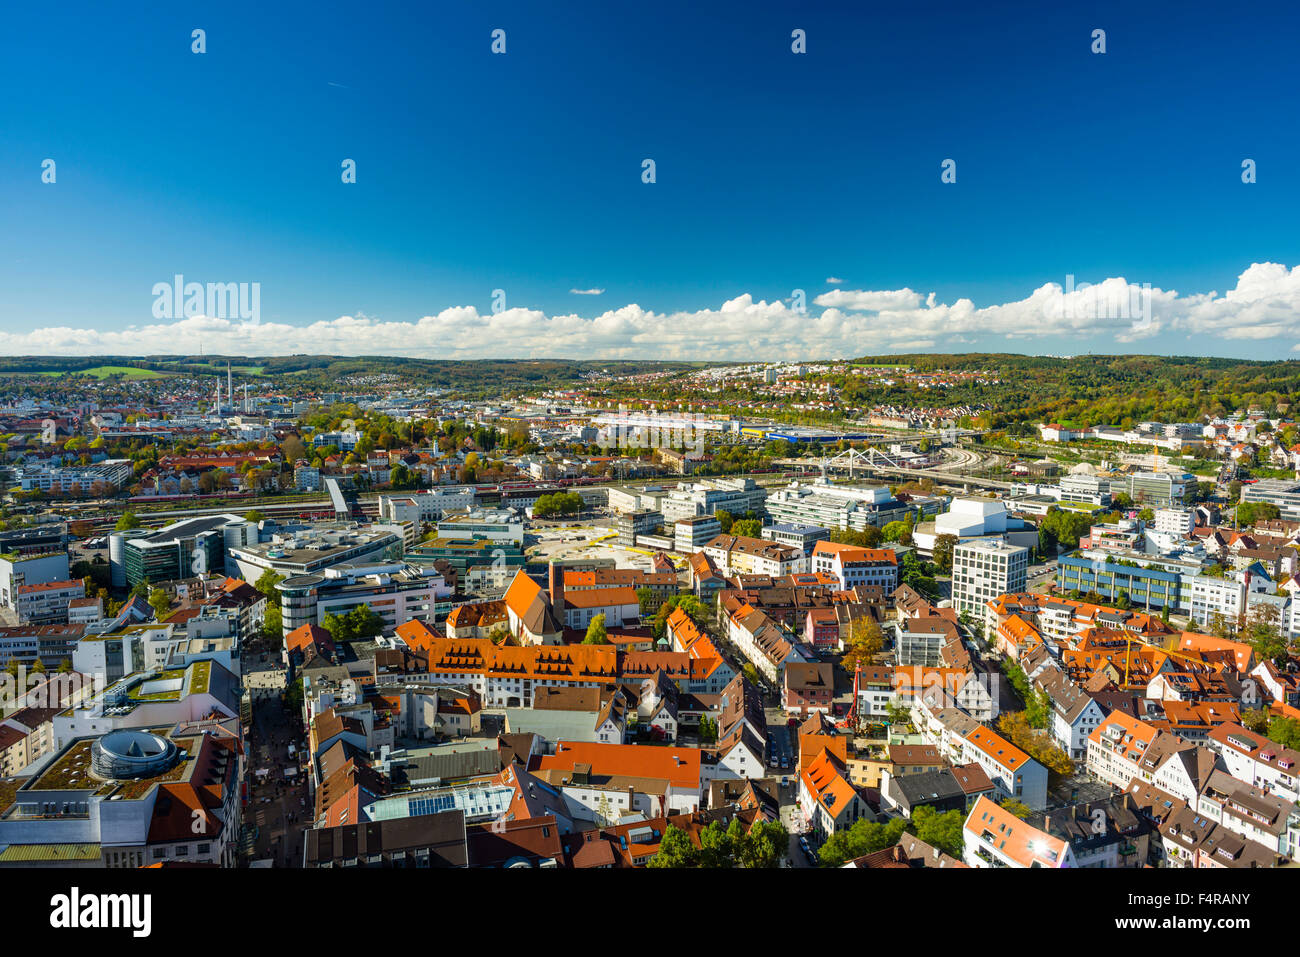 Bridge, Germany, Erhard, Eselsberg, Europe, central station, IKEA, city center, Münster, cathedral, panorama, theater, Ulm, resi Stock Photo